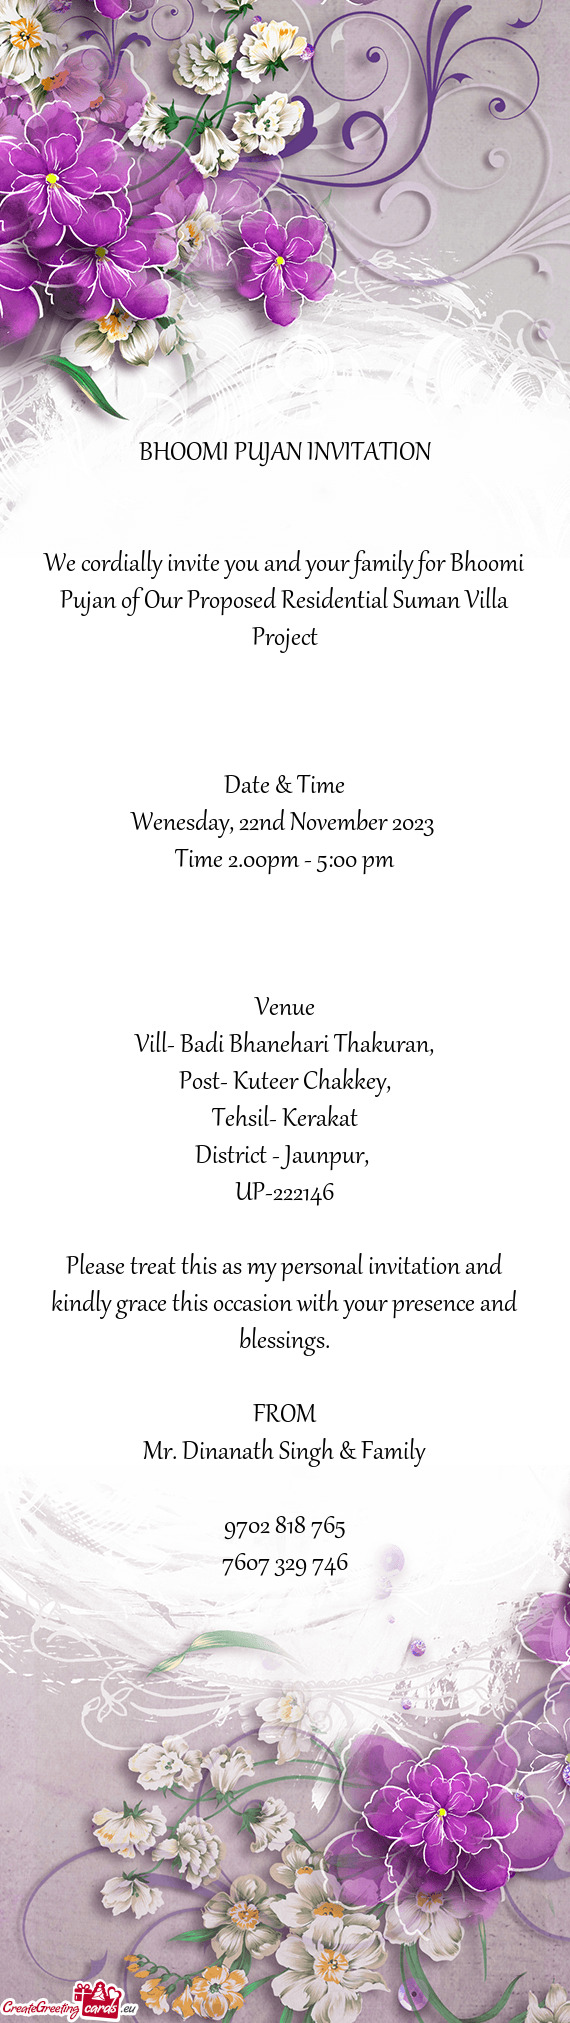 We cordially invite you and your family for Bhoomi Pujan of Our Proposed Residential Suman Villa Pro